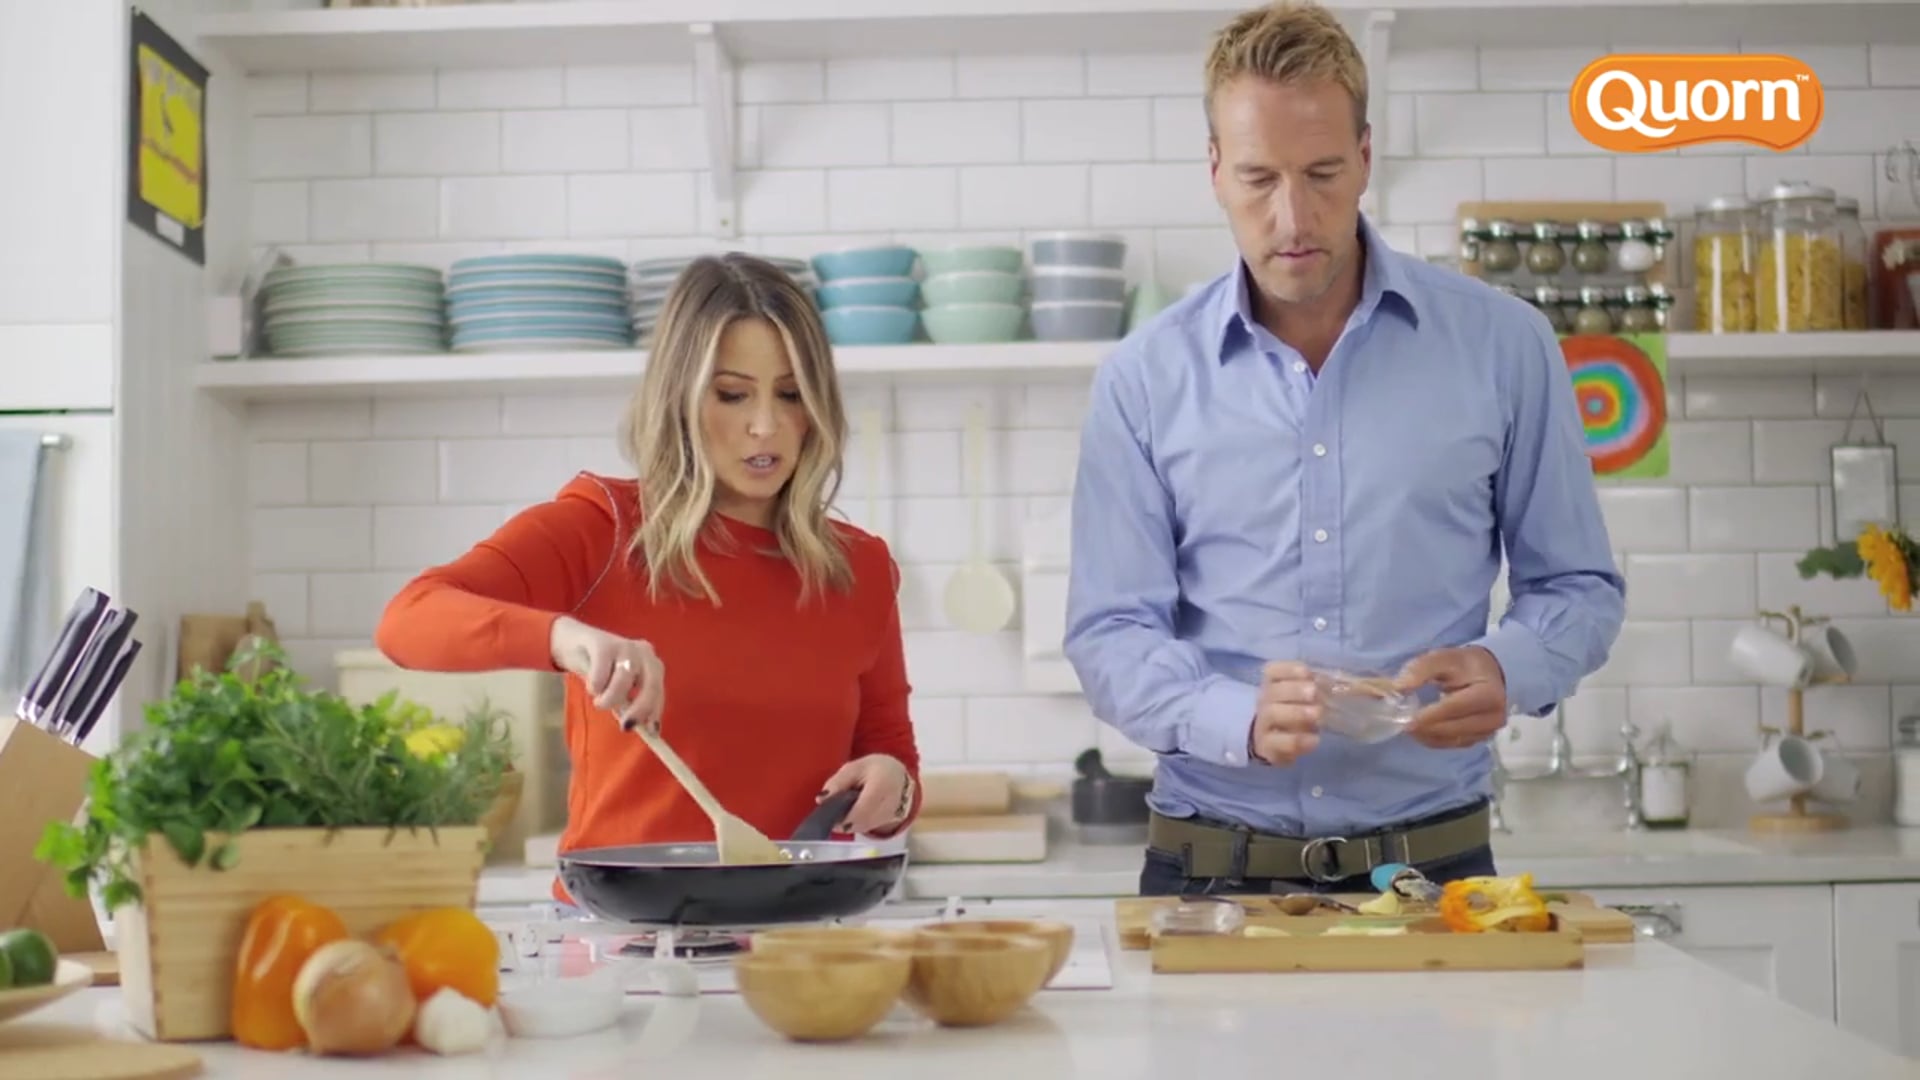 Quorn | 'Plate Up' Series Episode 3 with Ben Fogle and Rachel Stevens